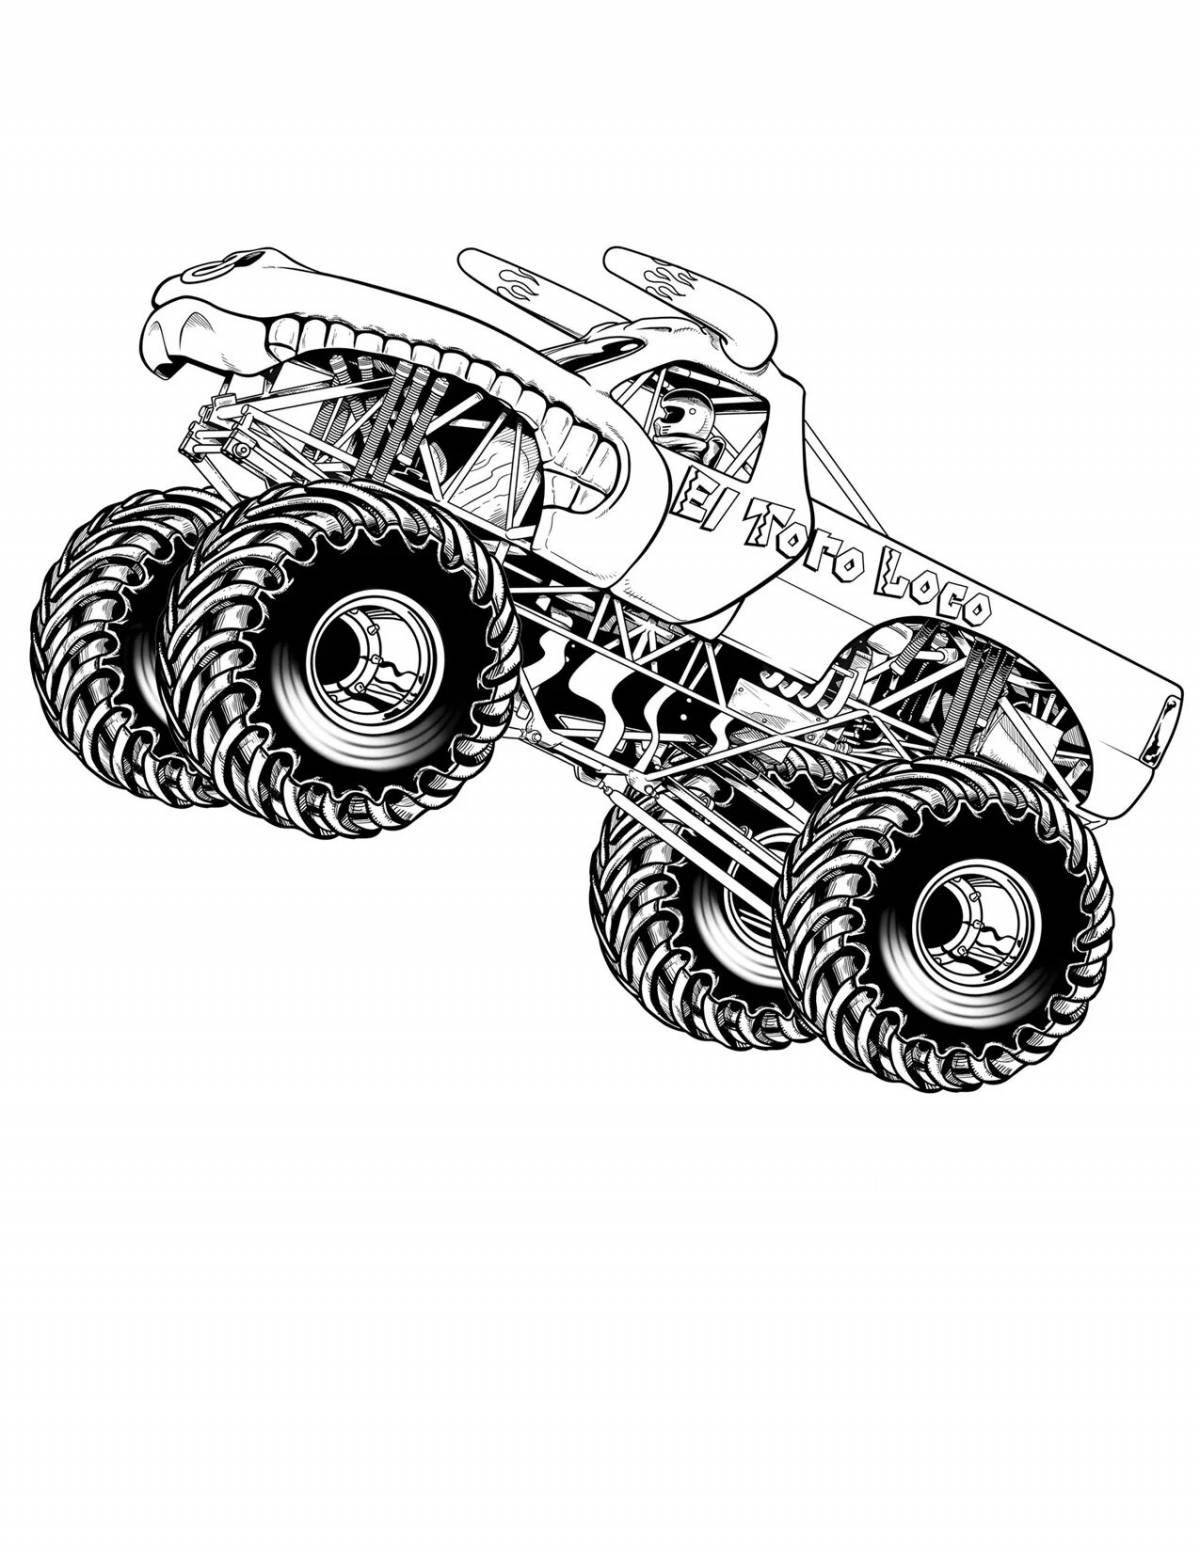 Charming hot wheels monster truck coloring book